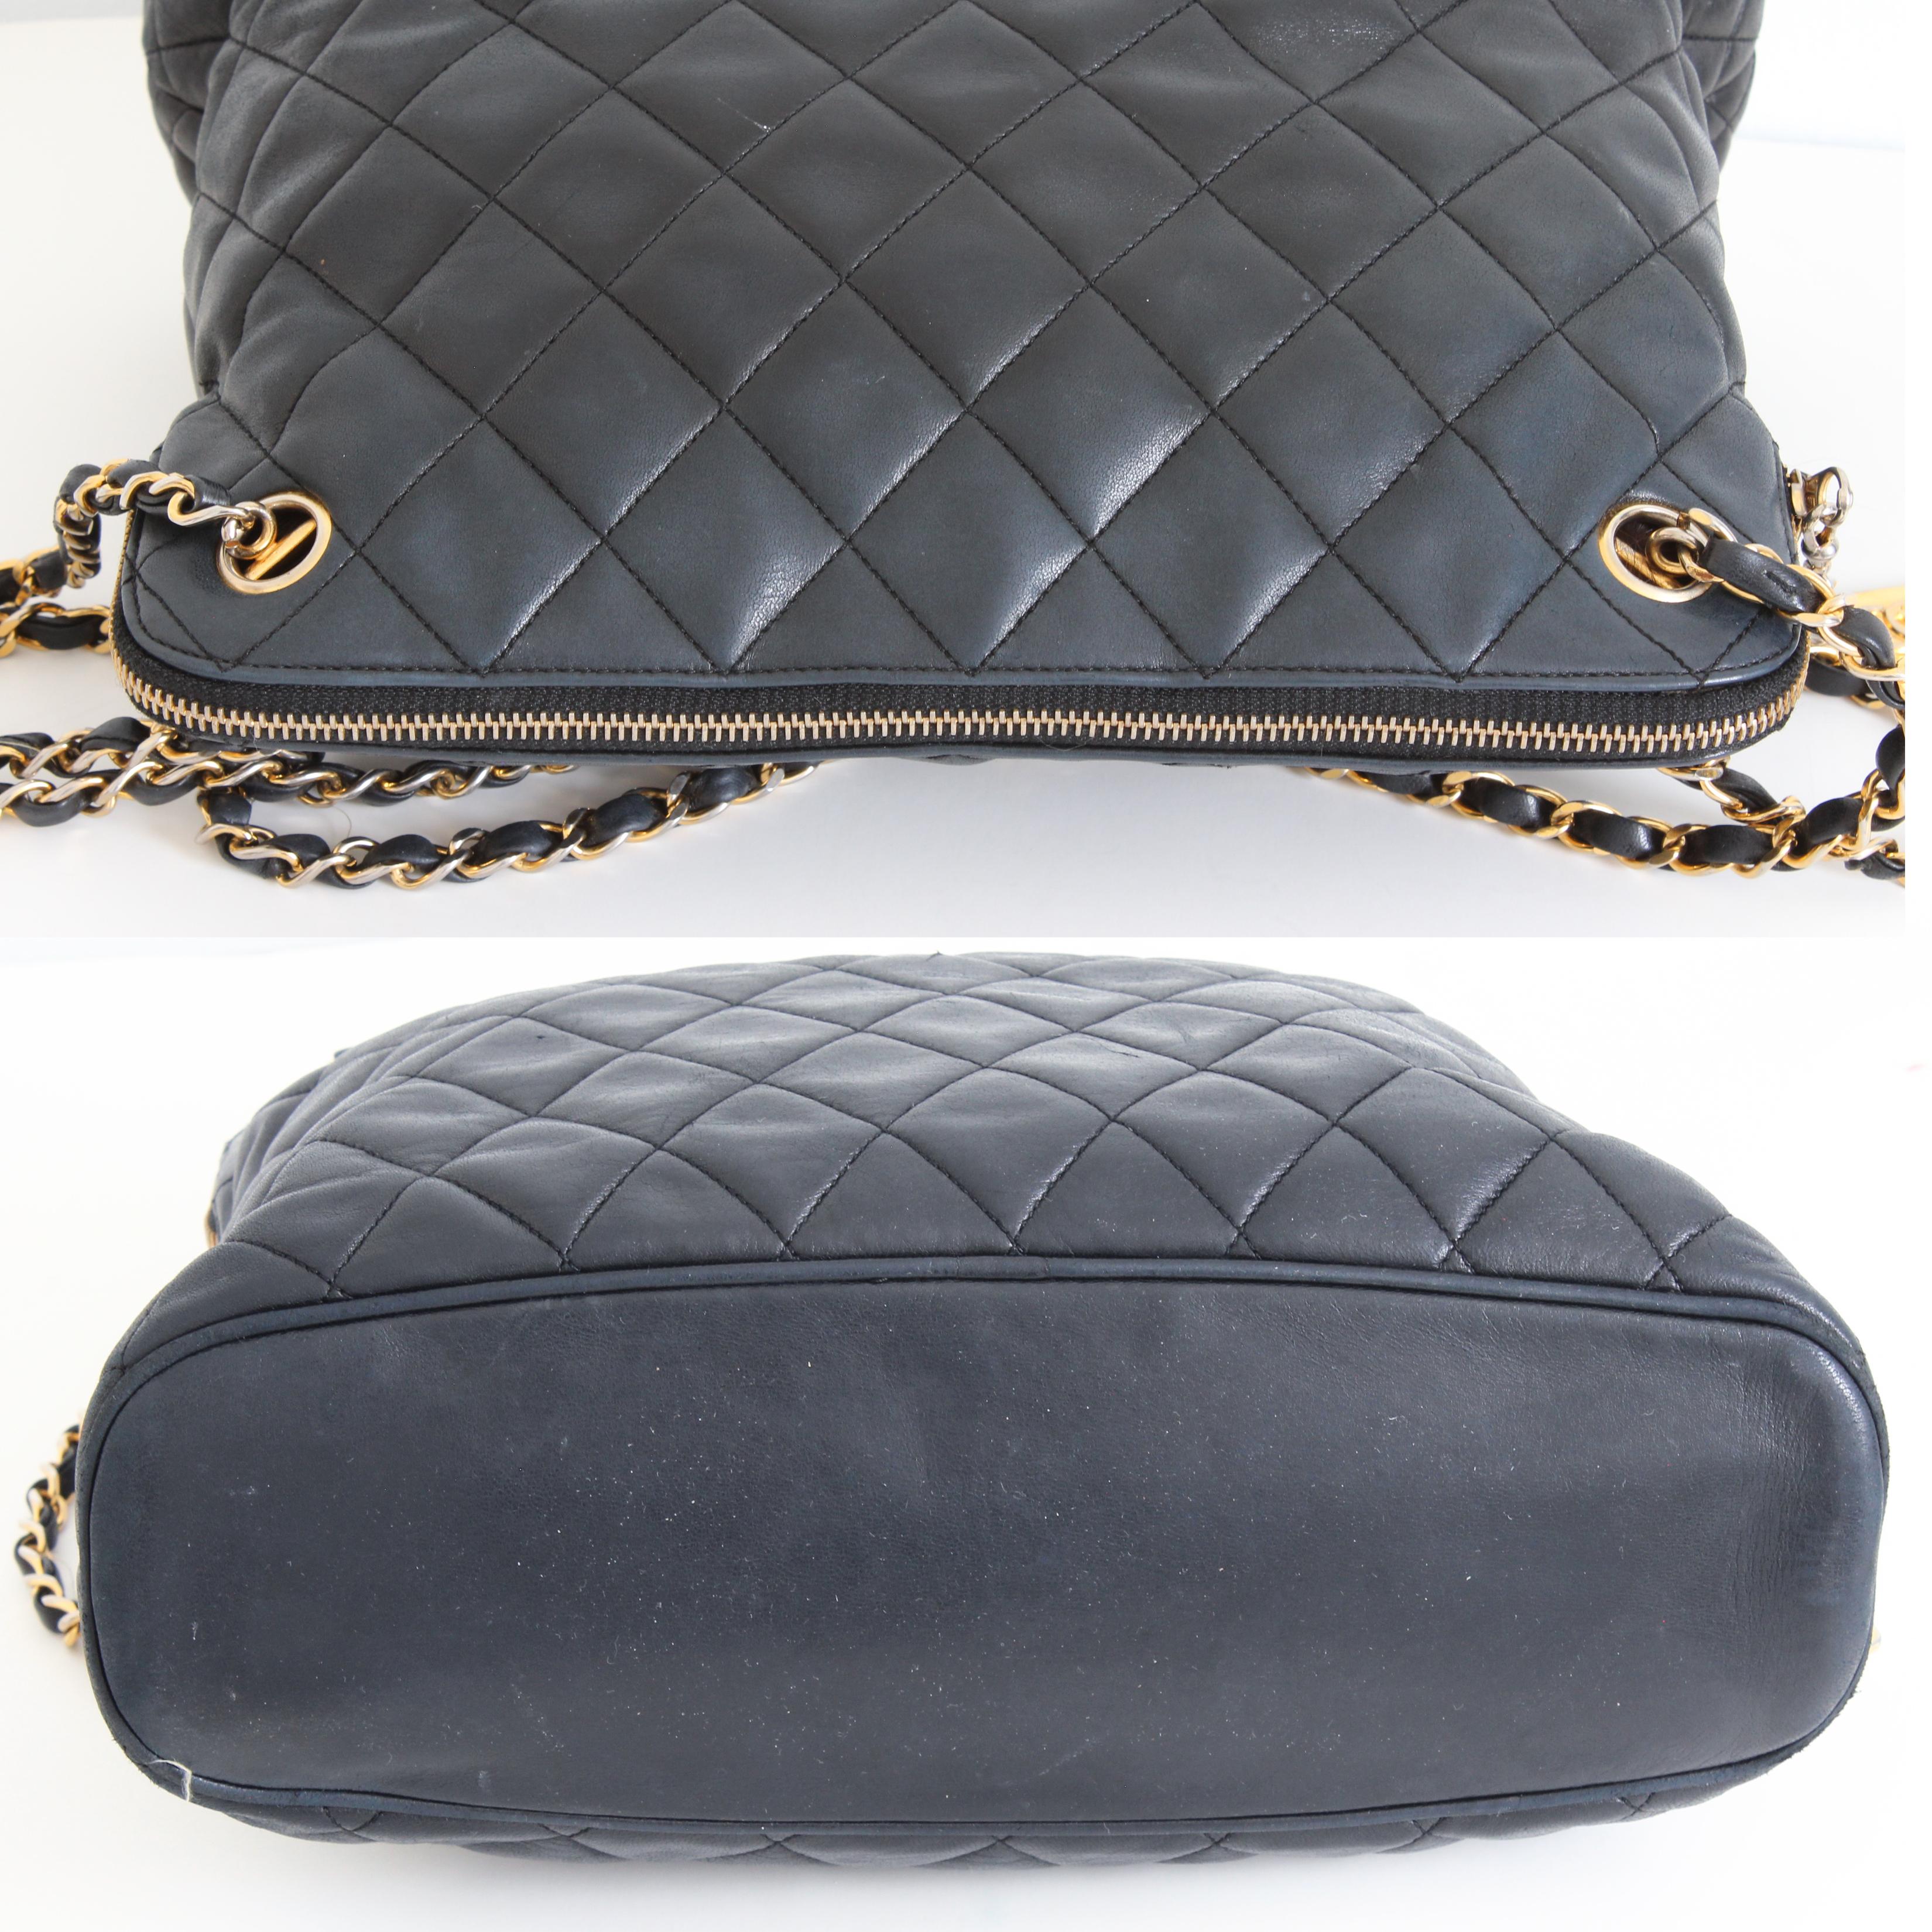 Iconic Chanel Shoulder Bag Lambskin Matelasse Leather Chain Straps + Dust Bag In Good Condition In Port Saint Lucie, FL